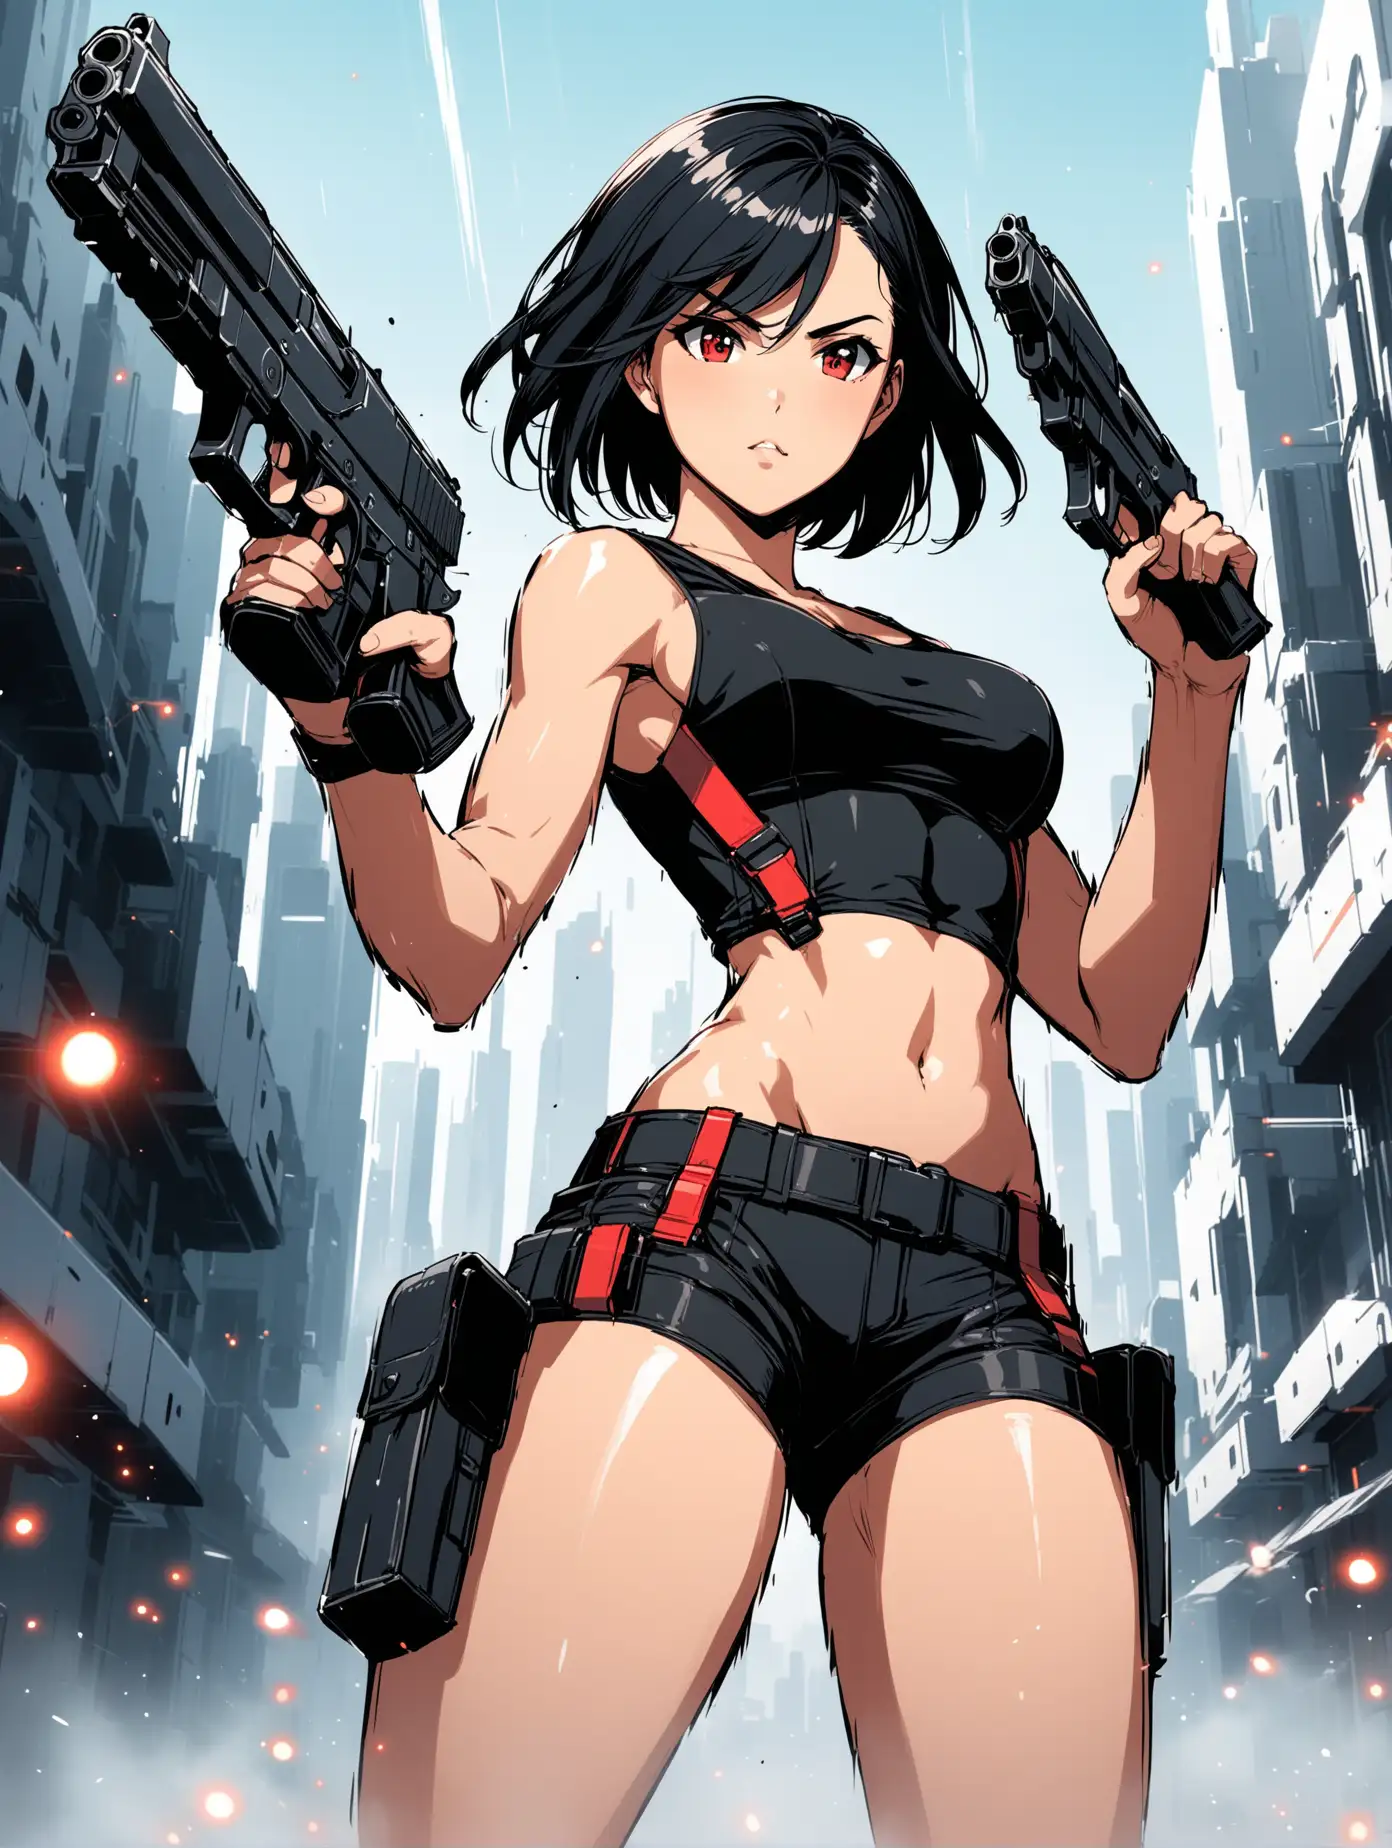 sexy fit 24 year old hero girl, short chin length black hair, firing handguns in each hand in futuristic town, toned body, sexy midriff, short black tank top, wearing suspenders, black shorts, holsters on each thigh, combat boots, red black white 3 color minimal design